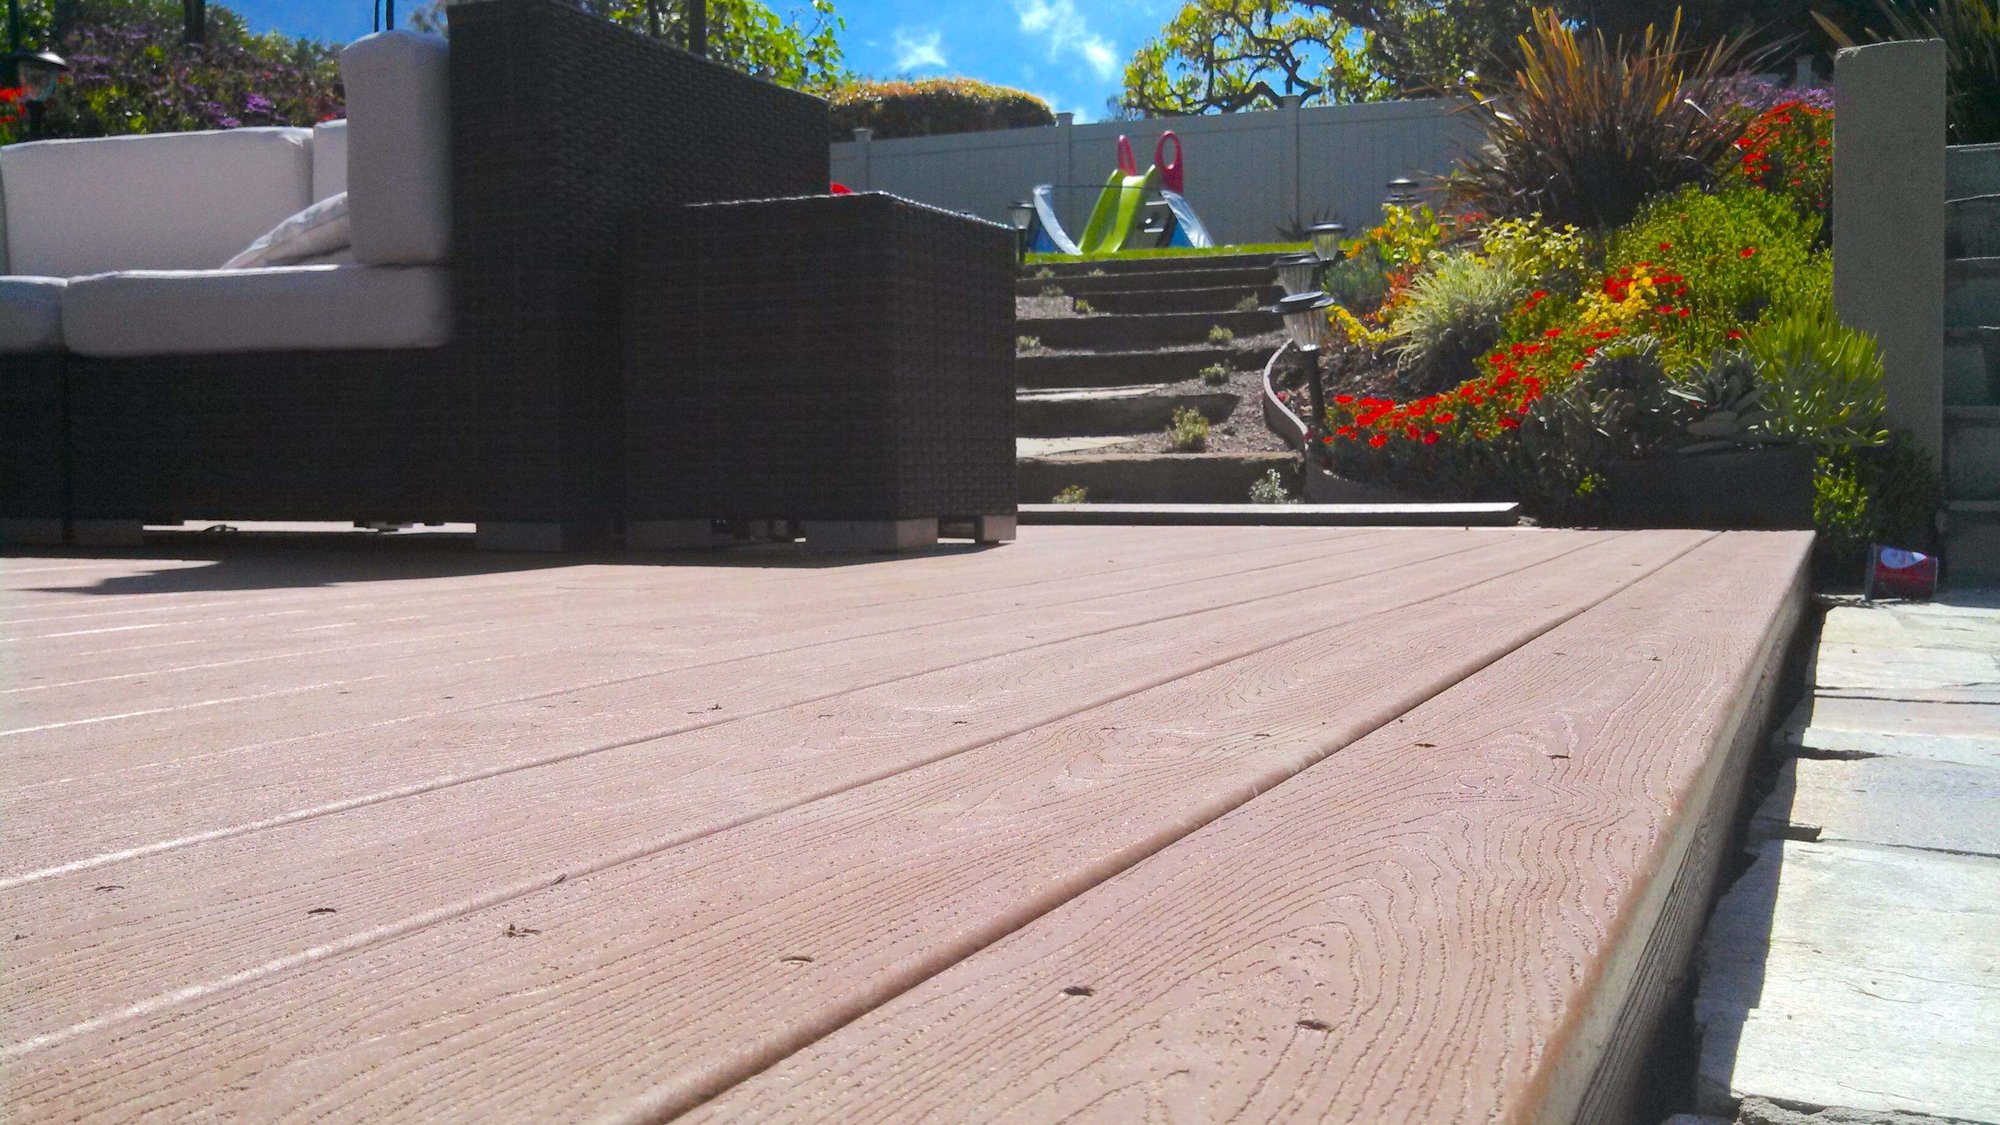 South Bay Deck Builder - Trex Composite Deck by Bay Cities Construction